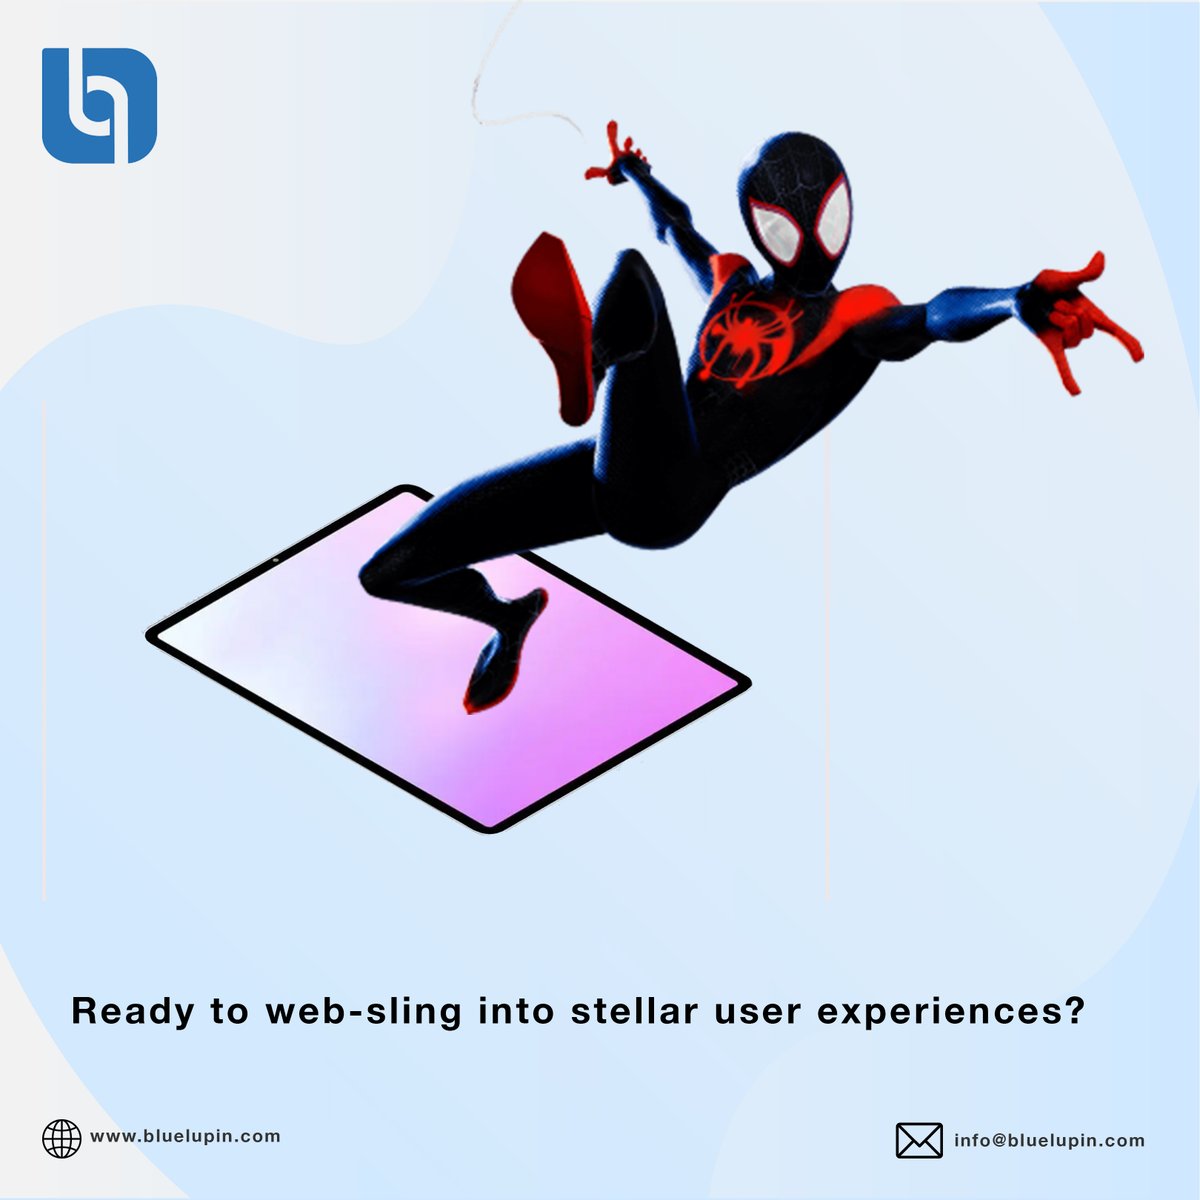 Struggling to captivate users? Let our web wizards weave their magic, creating turbocharged web applications that'll leave your users spellbound & craving more!

#bluelupin #service #services #bluelupinservices #web #webapplication #SpiderMan #SpiderManAcrossTheSpiderVerse